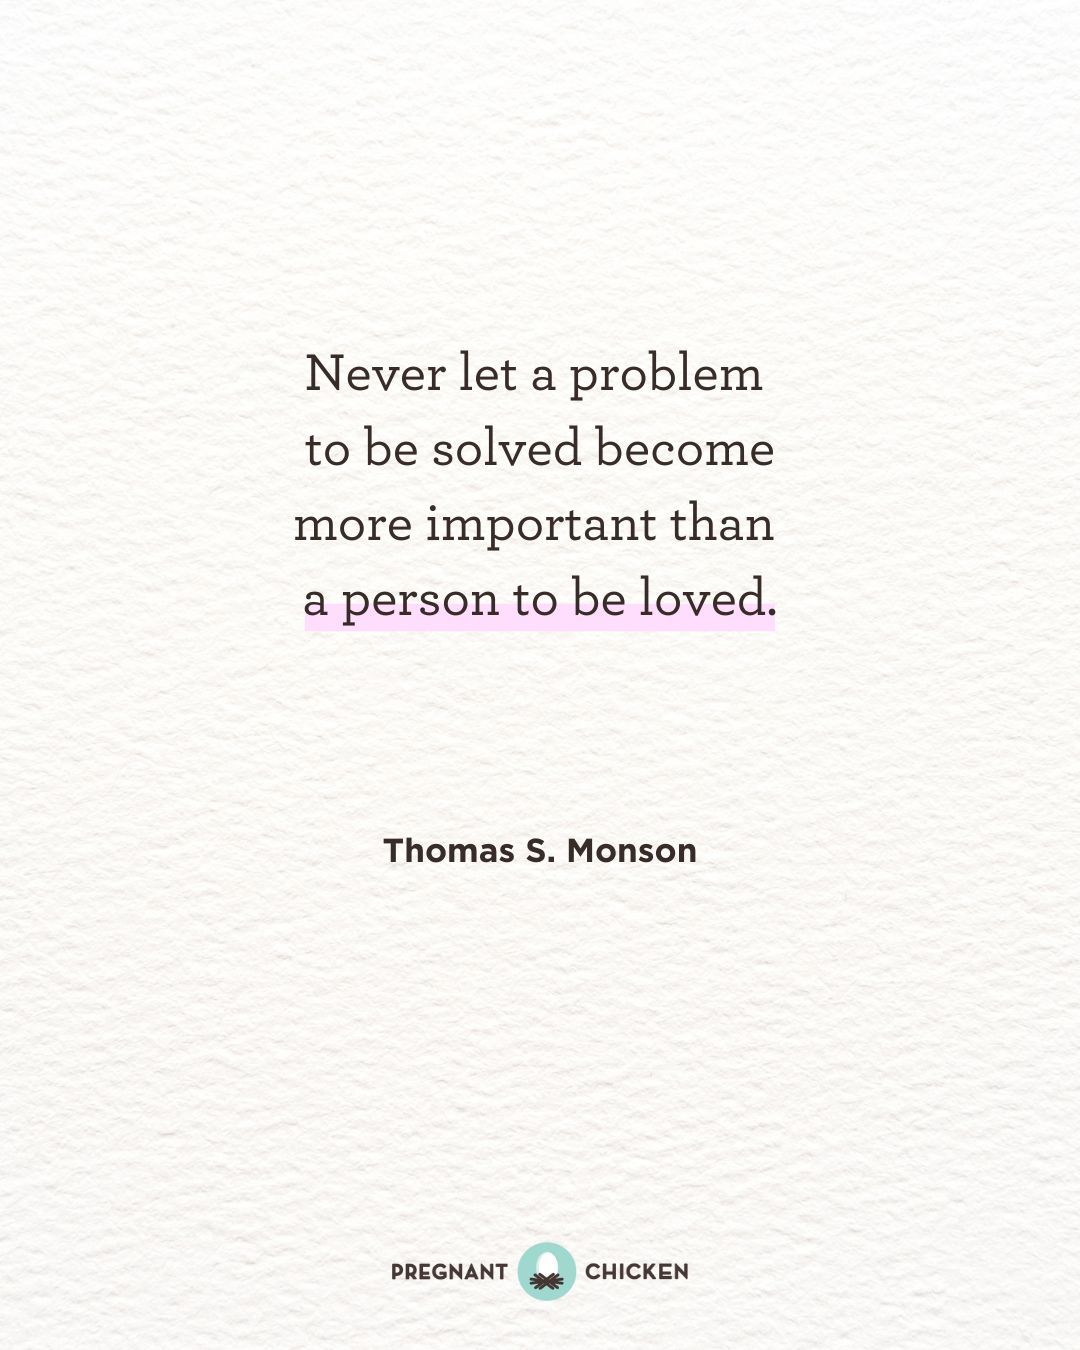 Never let a problem to be solved become more important than a person to be loved.